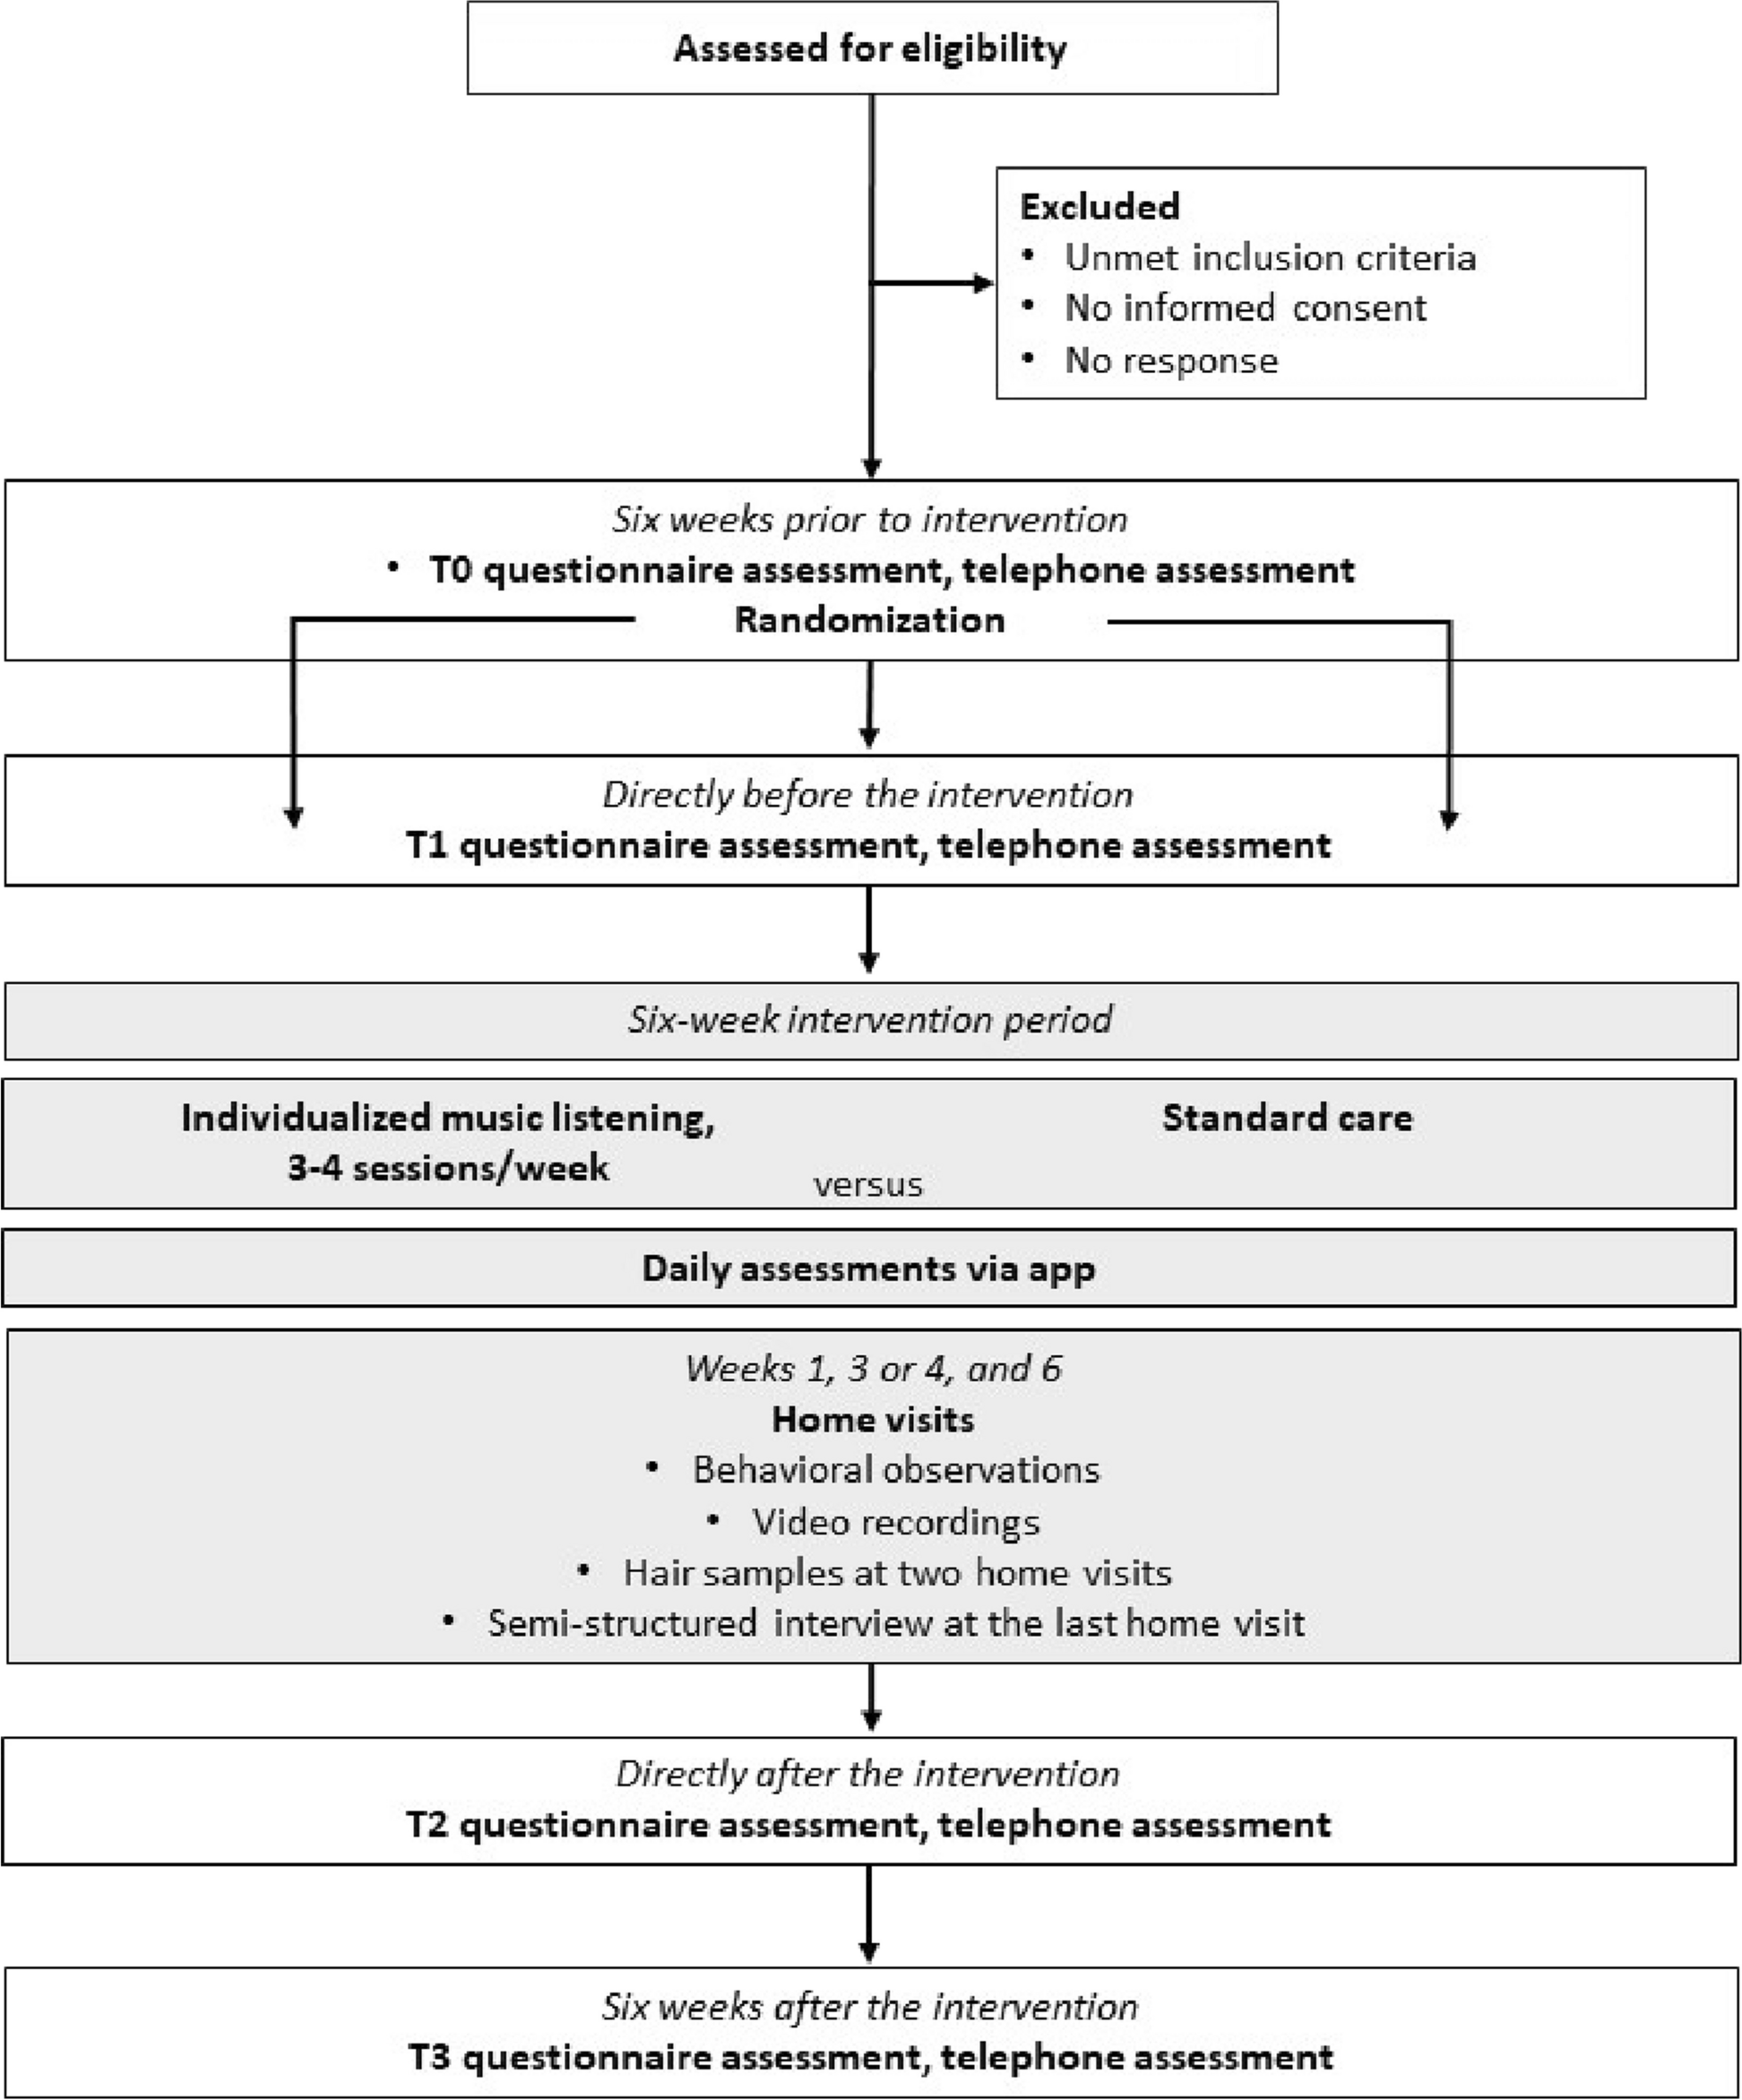 Study protocol: randomized controlled trial of an individualized music intervention for people with dementia in the home care setting